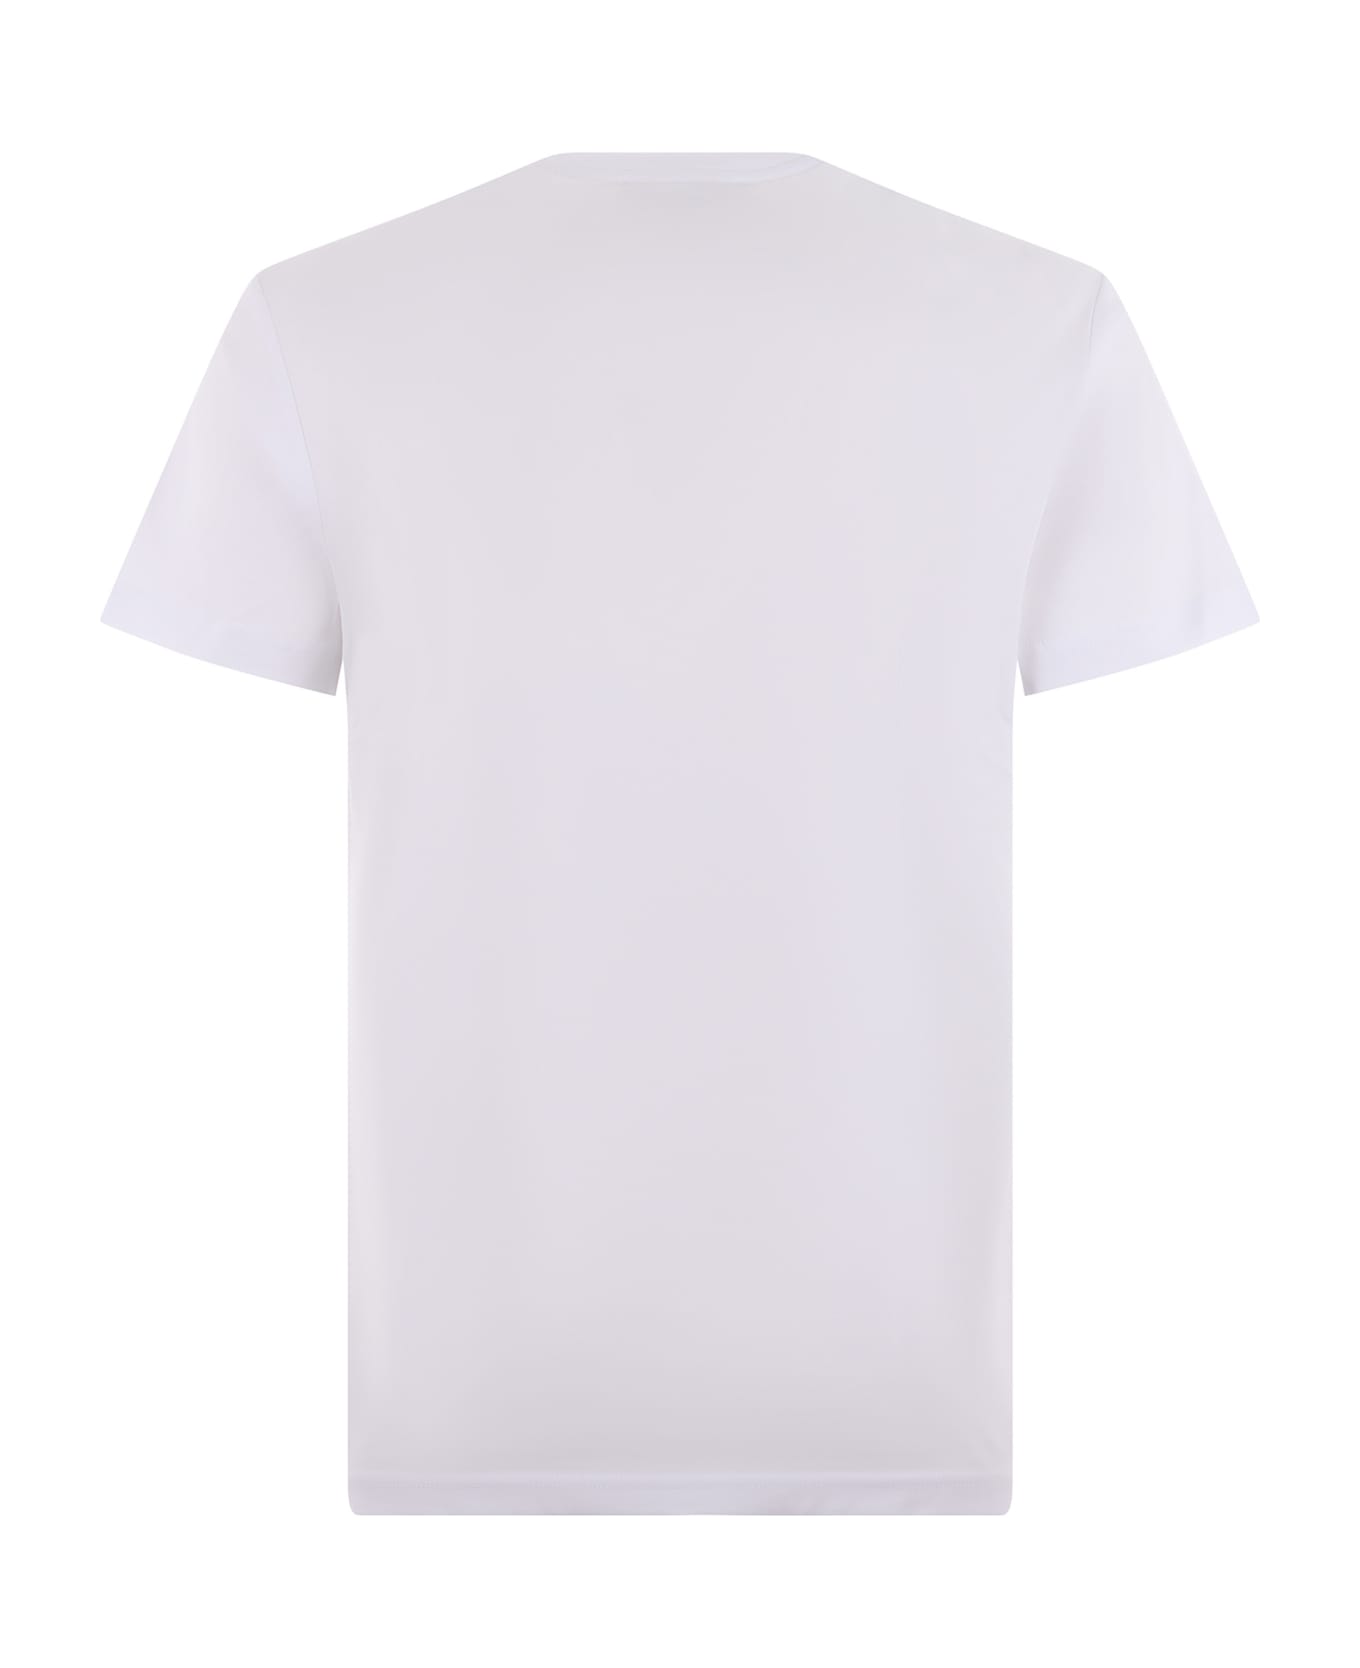 Versace Jeans Couture Printed T-shirt Versace Jeans Couture - Bianco/oro シャツ